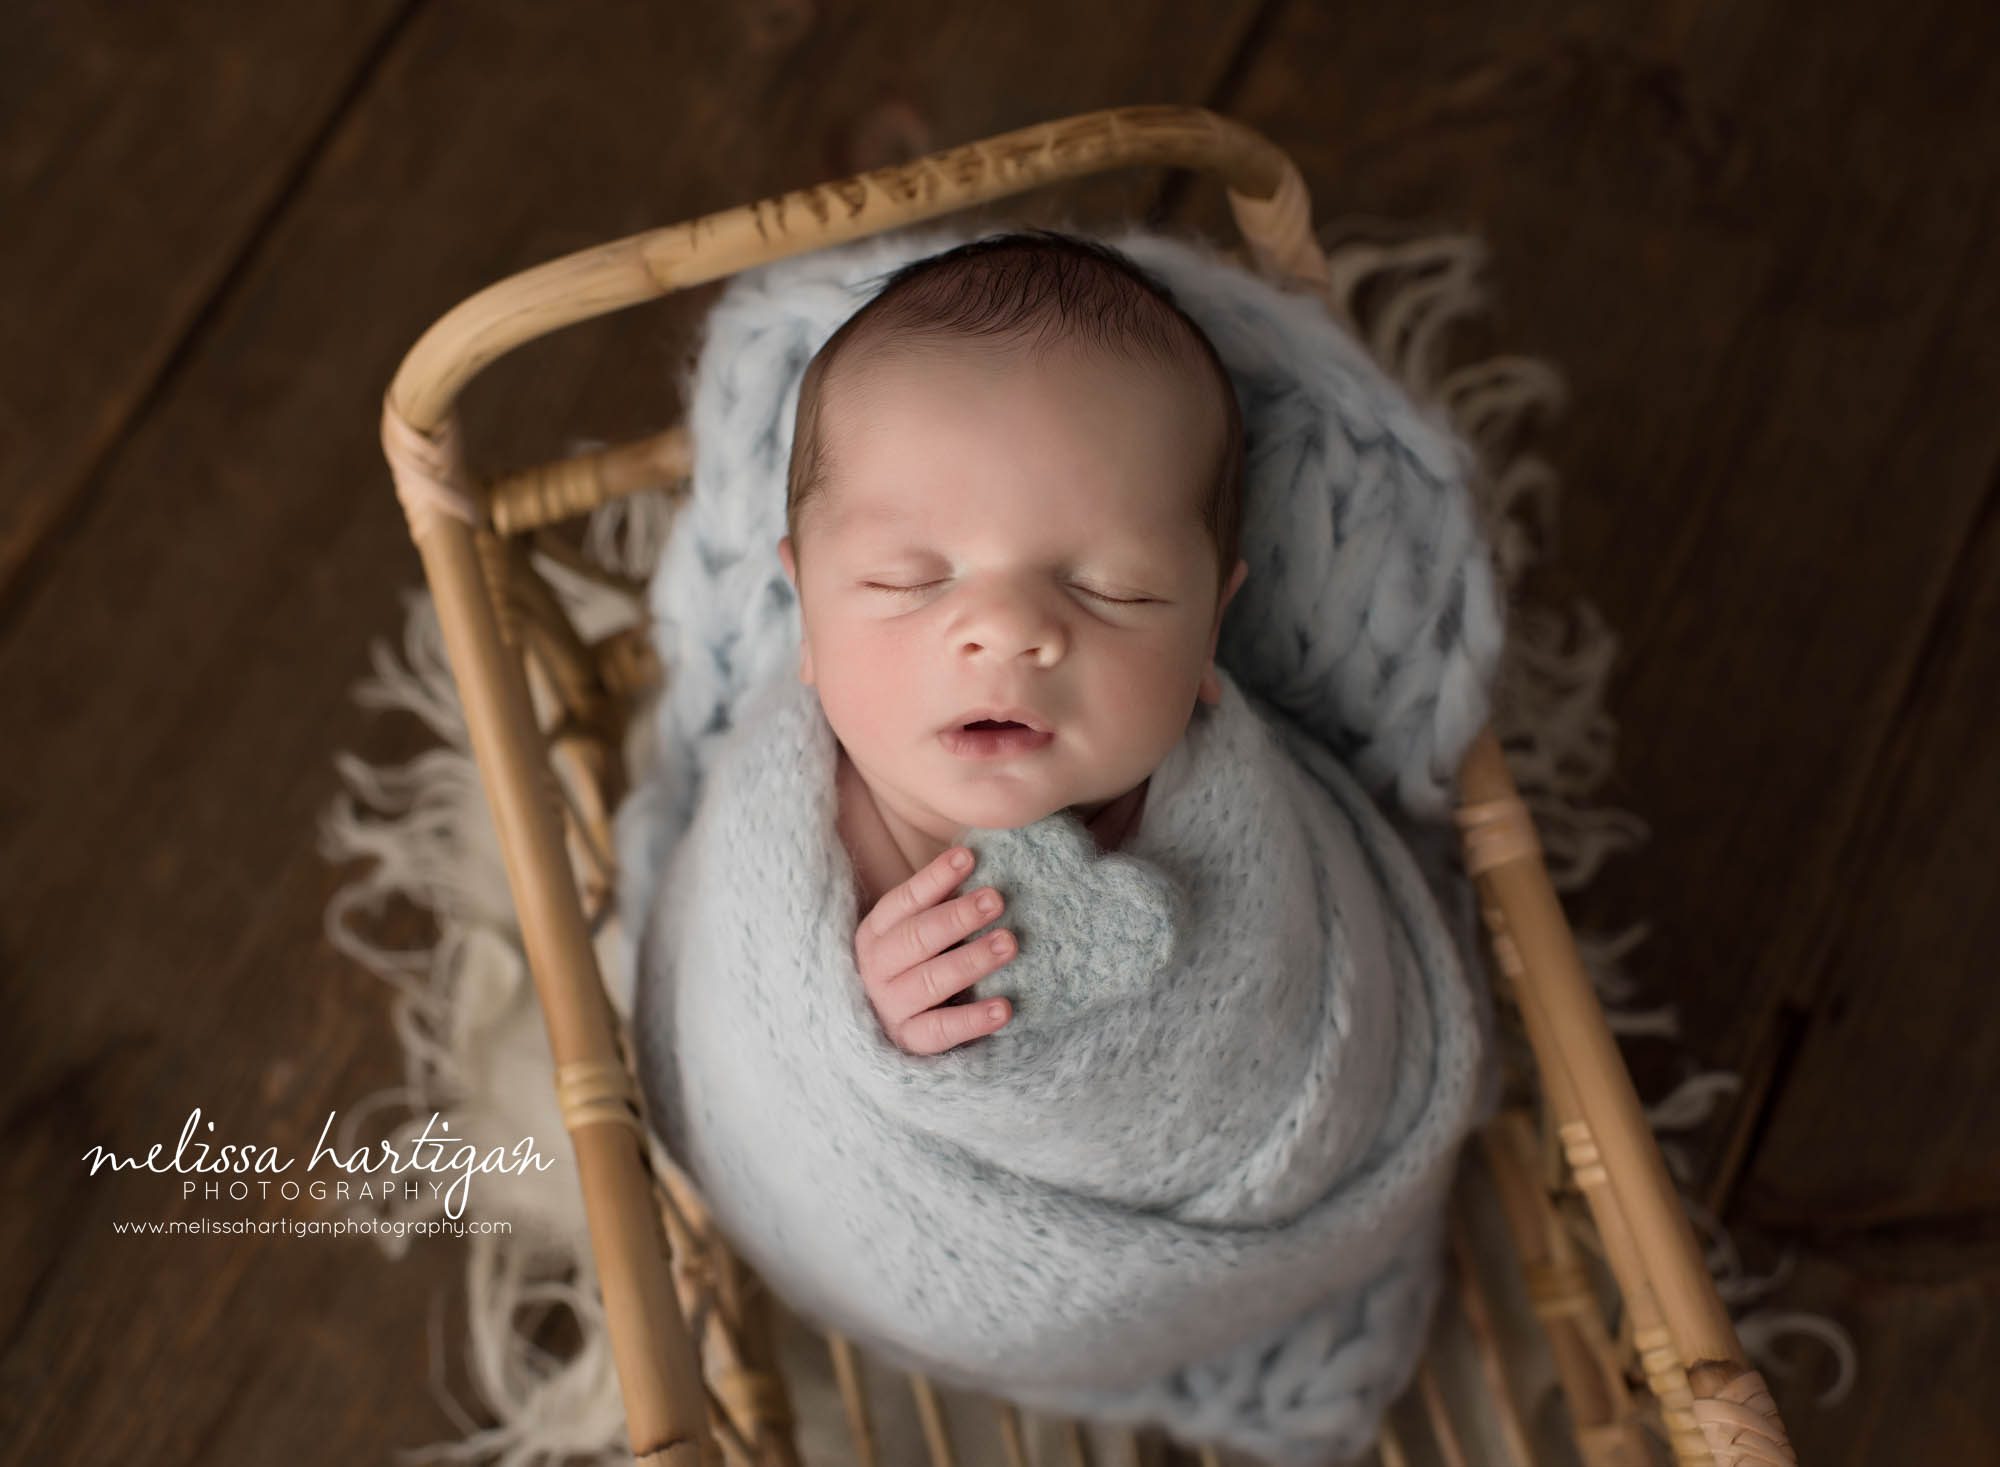 newborn baby boy wrapped in blue wrap posed in basket holding light blue felted heart prop CT newborn photography